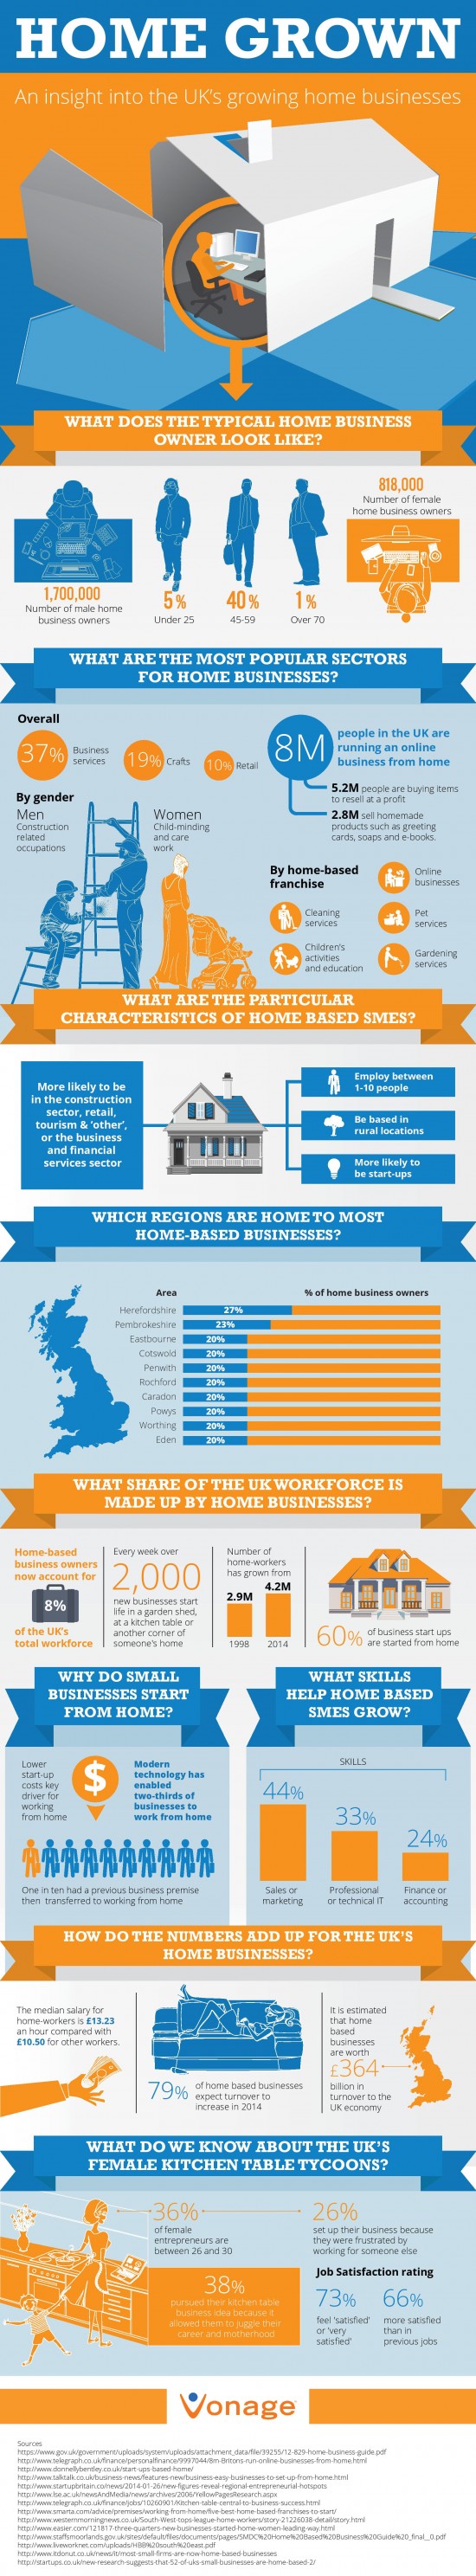 Growth of Home Business in the UK - Vonage Infographic